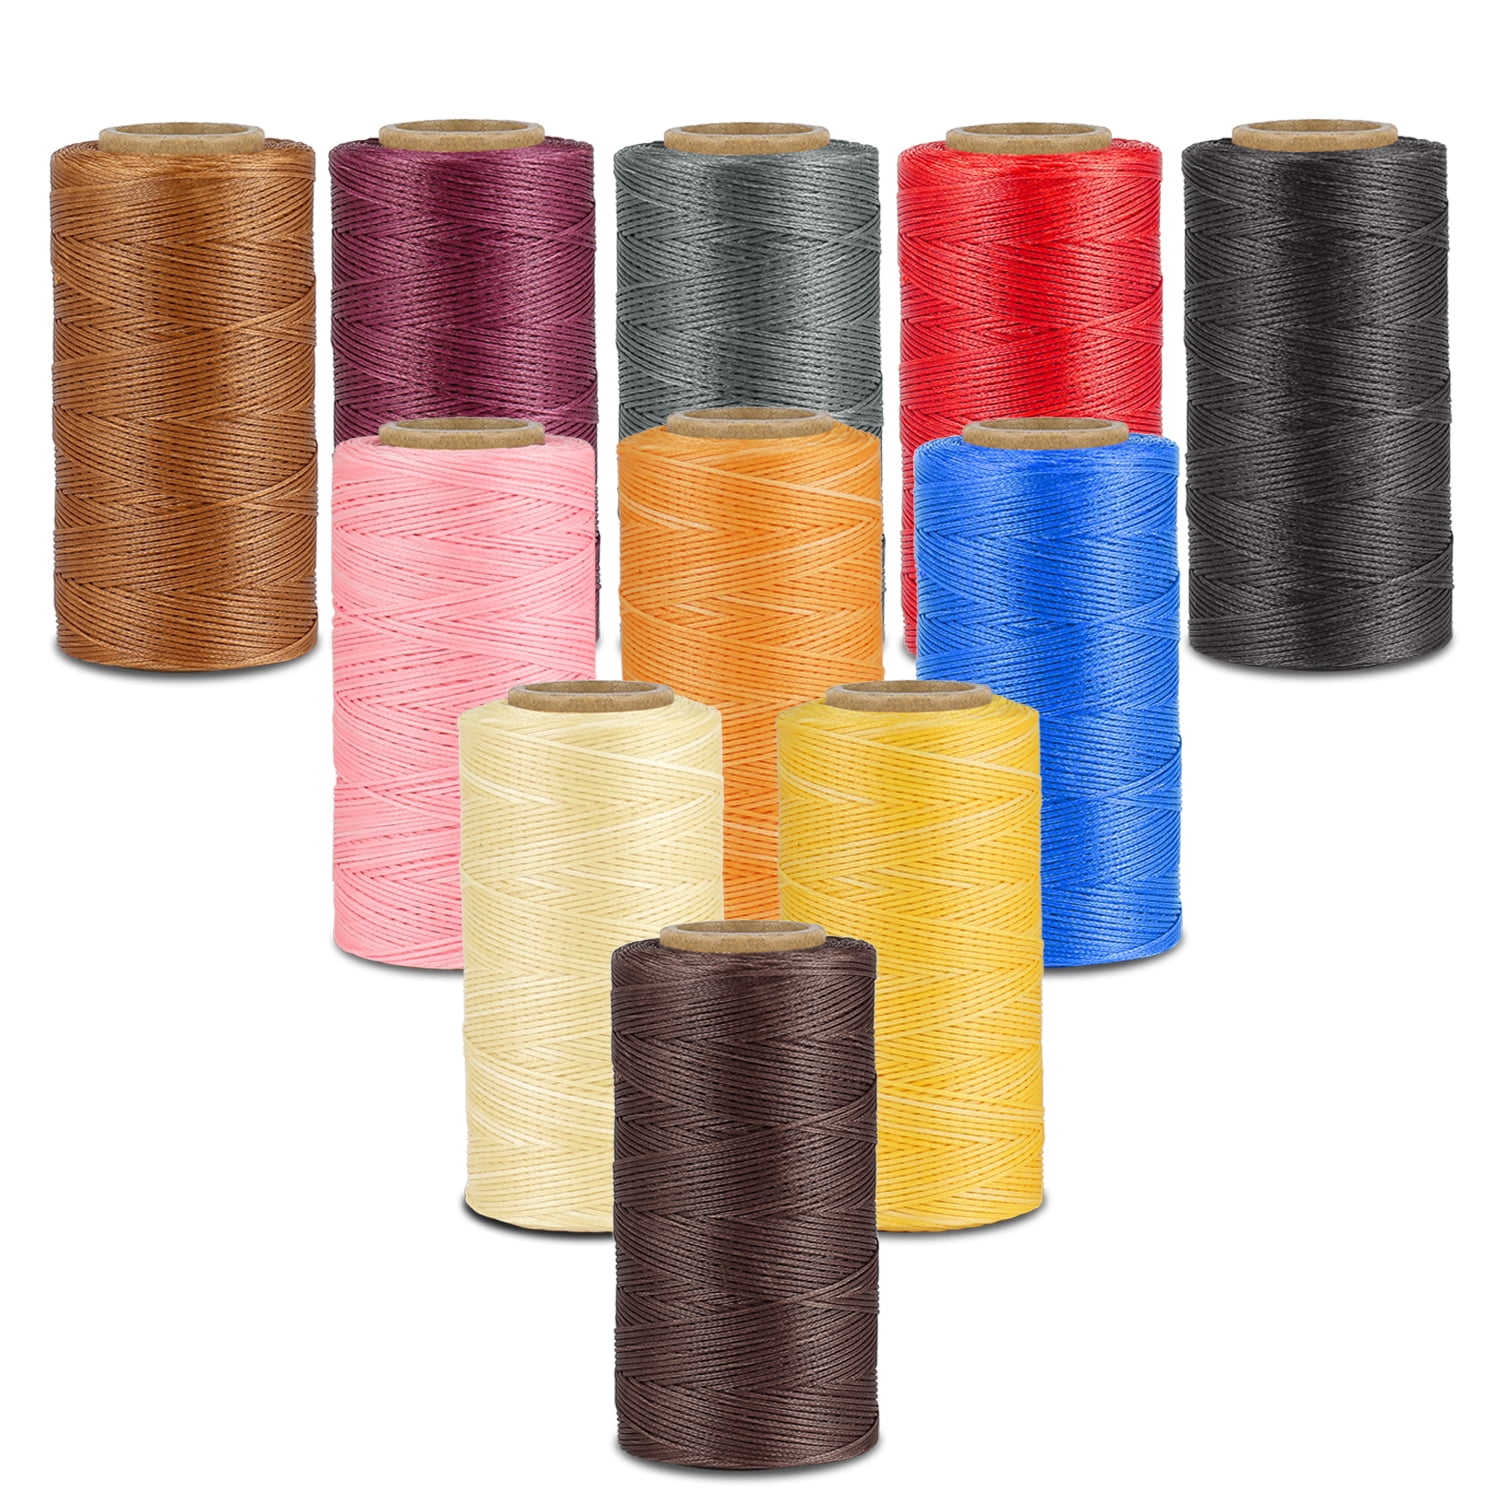 284Yards Leather Sewing Waxed Thread-Practical Long Stitching Thread for  Leather Craft DIY/Bookbinding/Shoe Repairing/Leather Projects Black